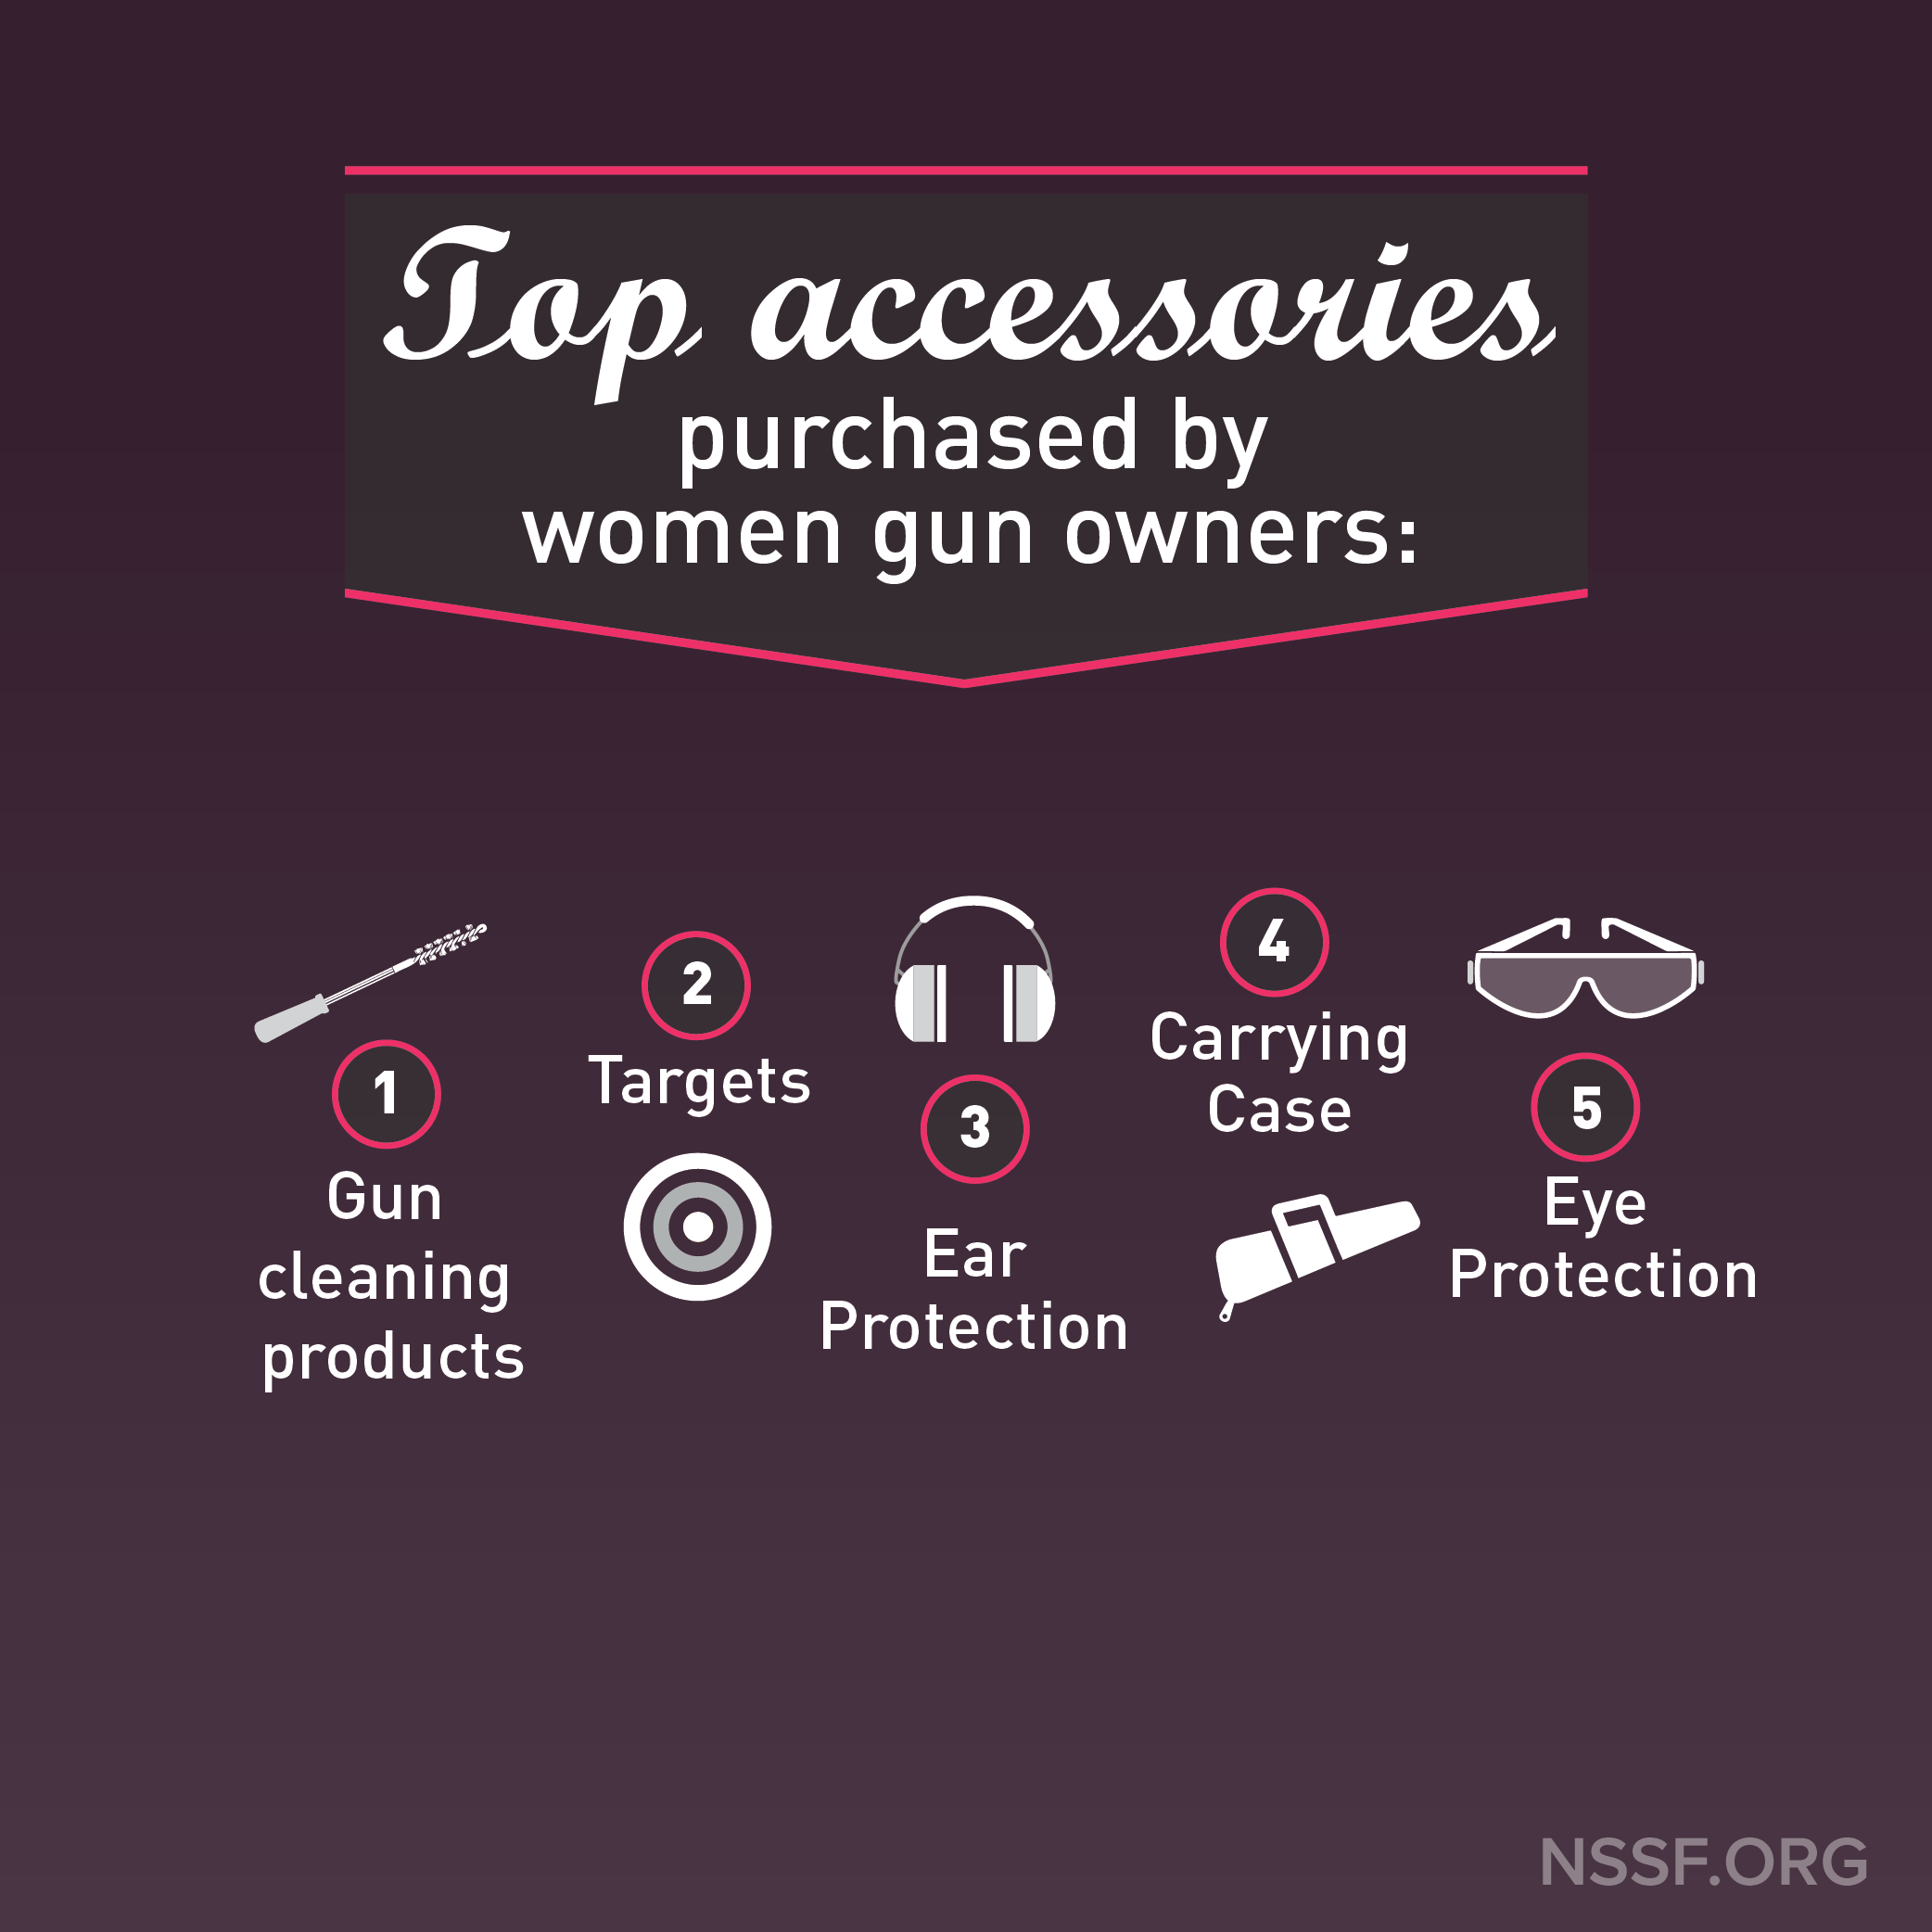 The+top+accessories+purchased+by+women+gun+owners+are: